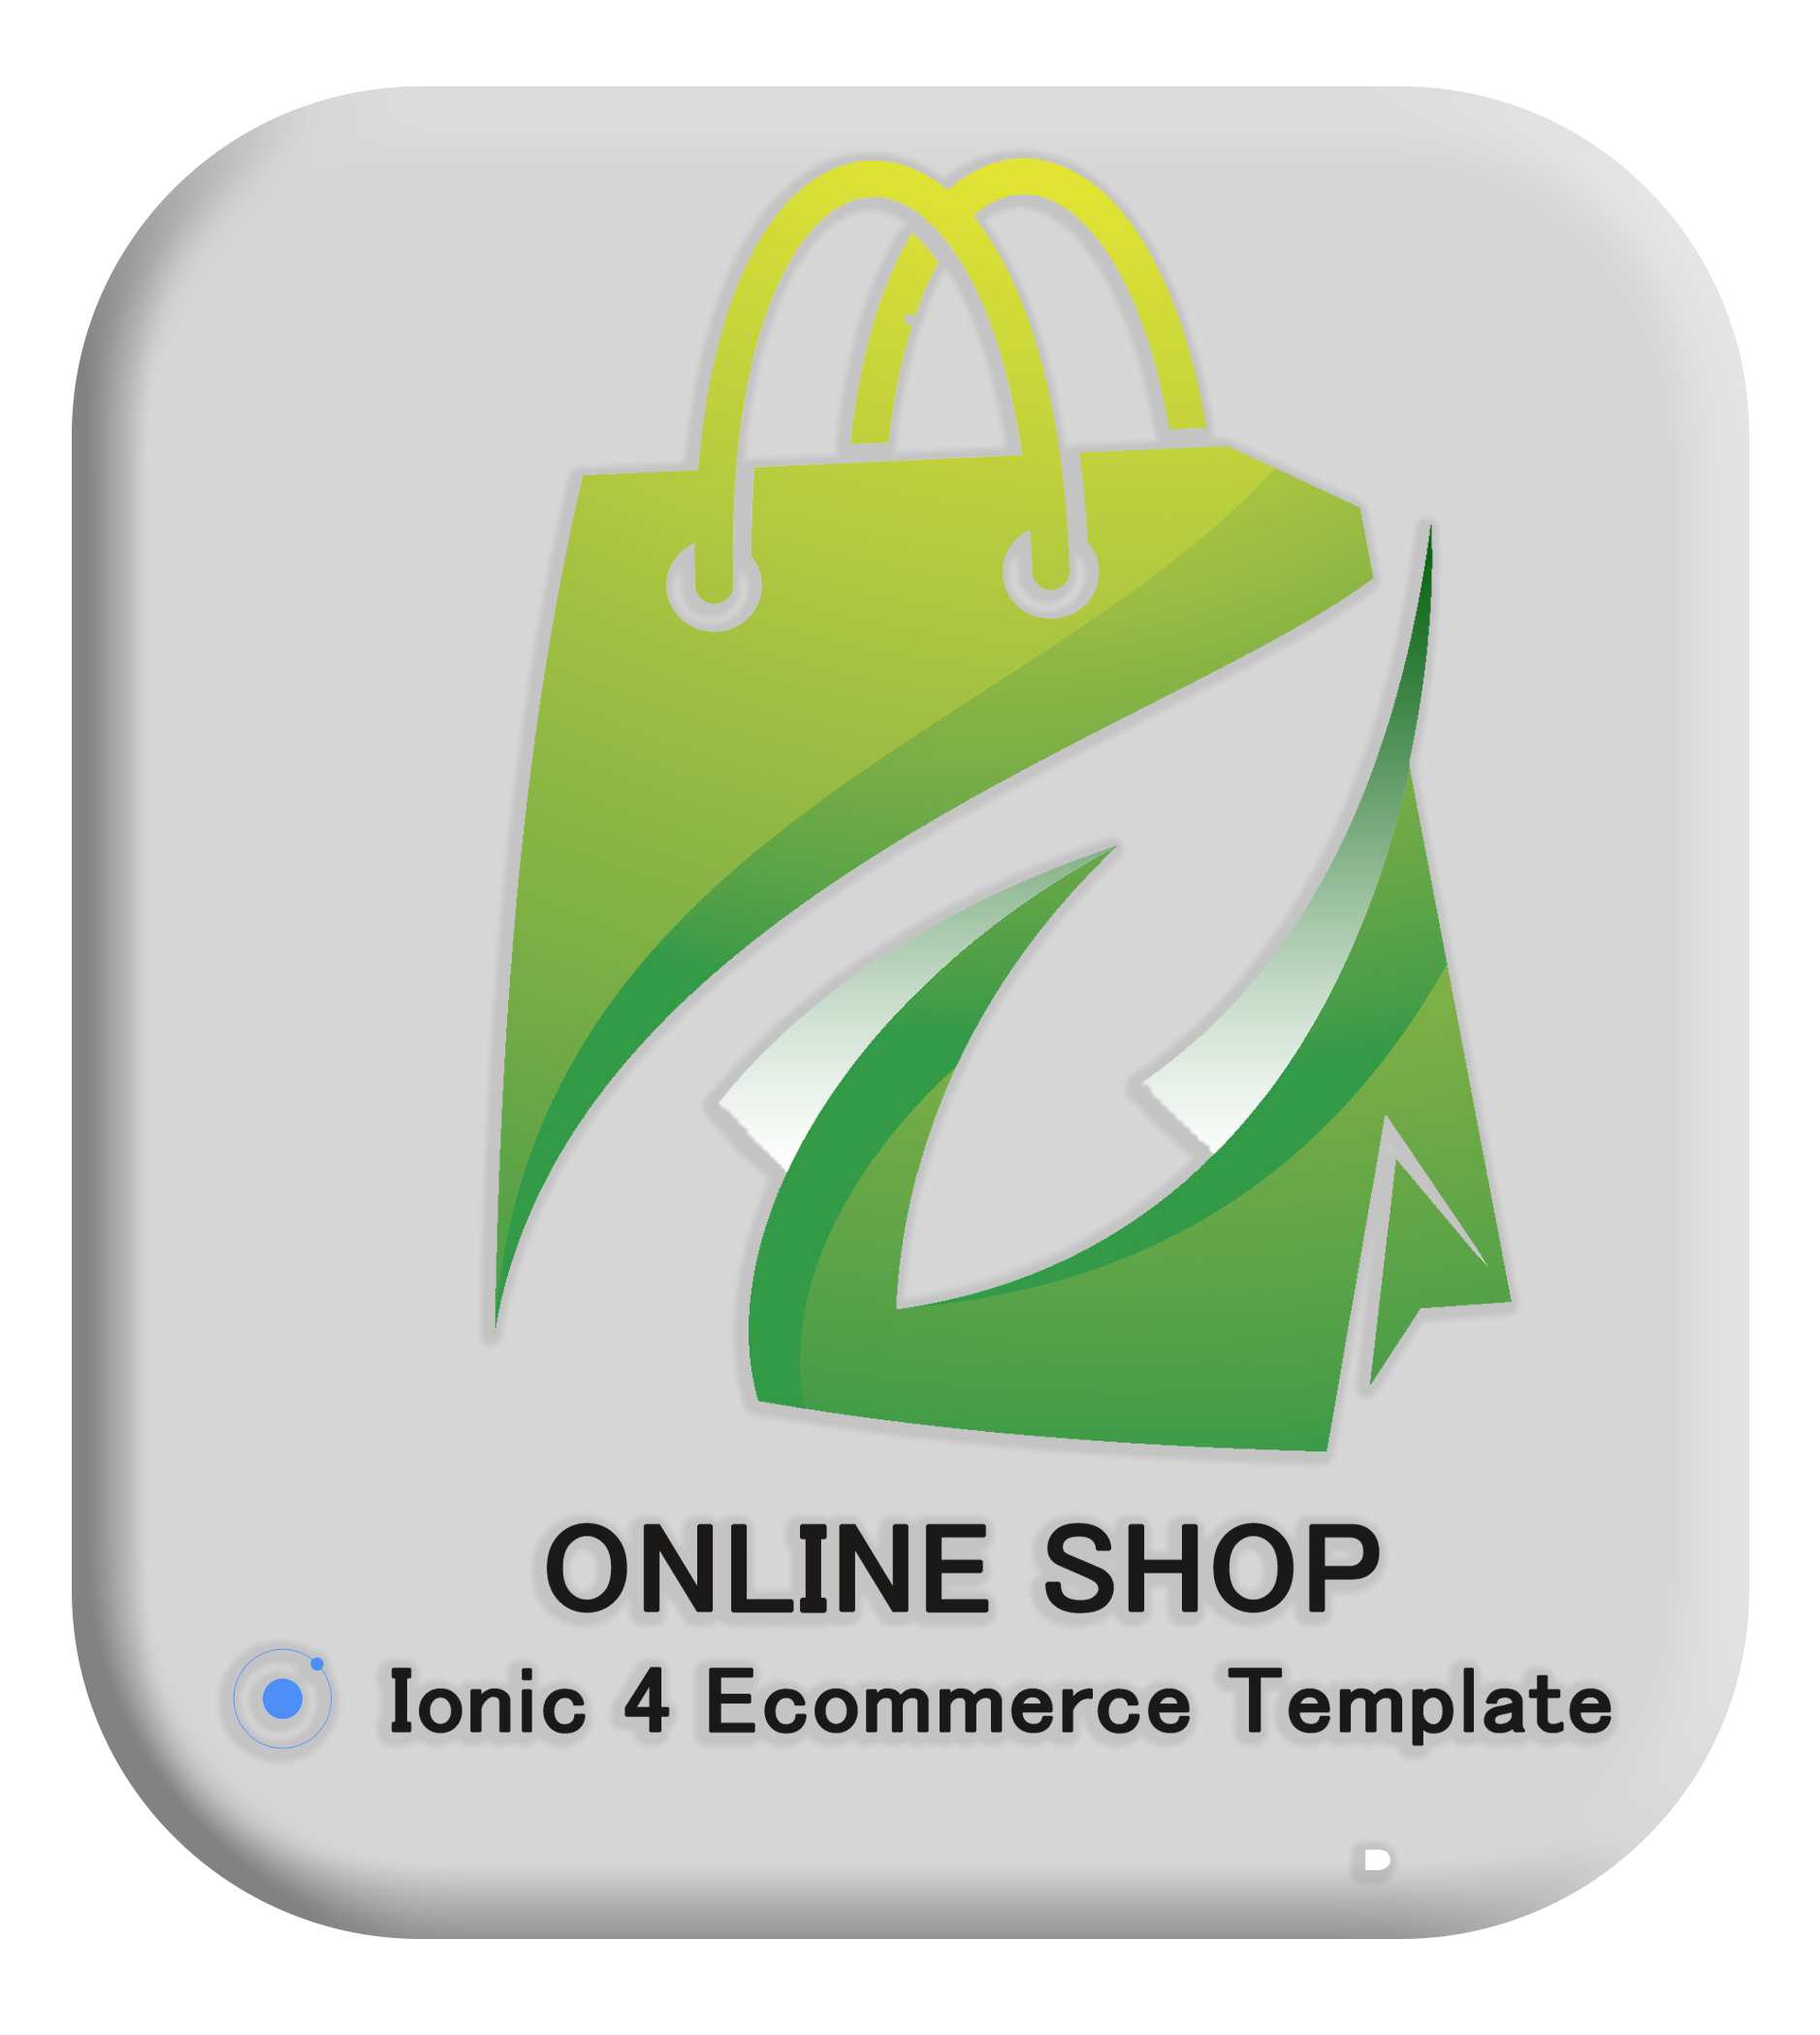 Ionic 4 Online Shop Template